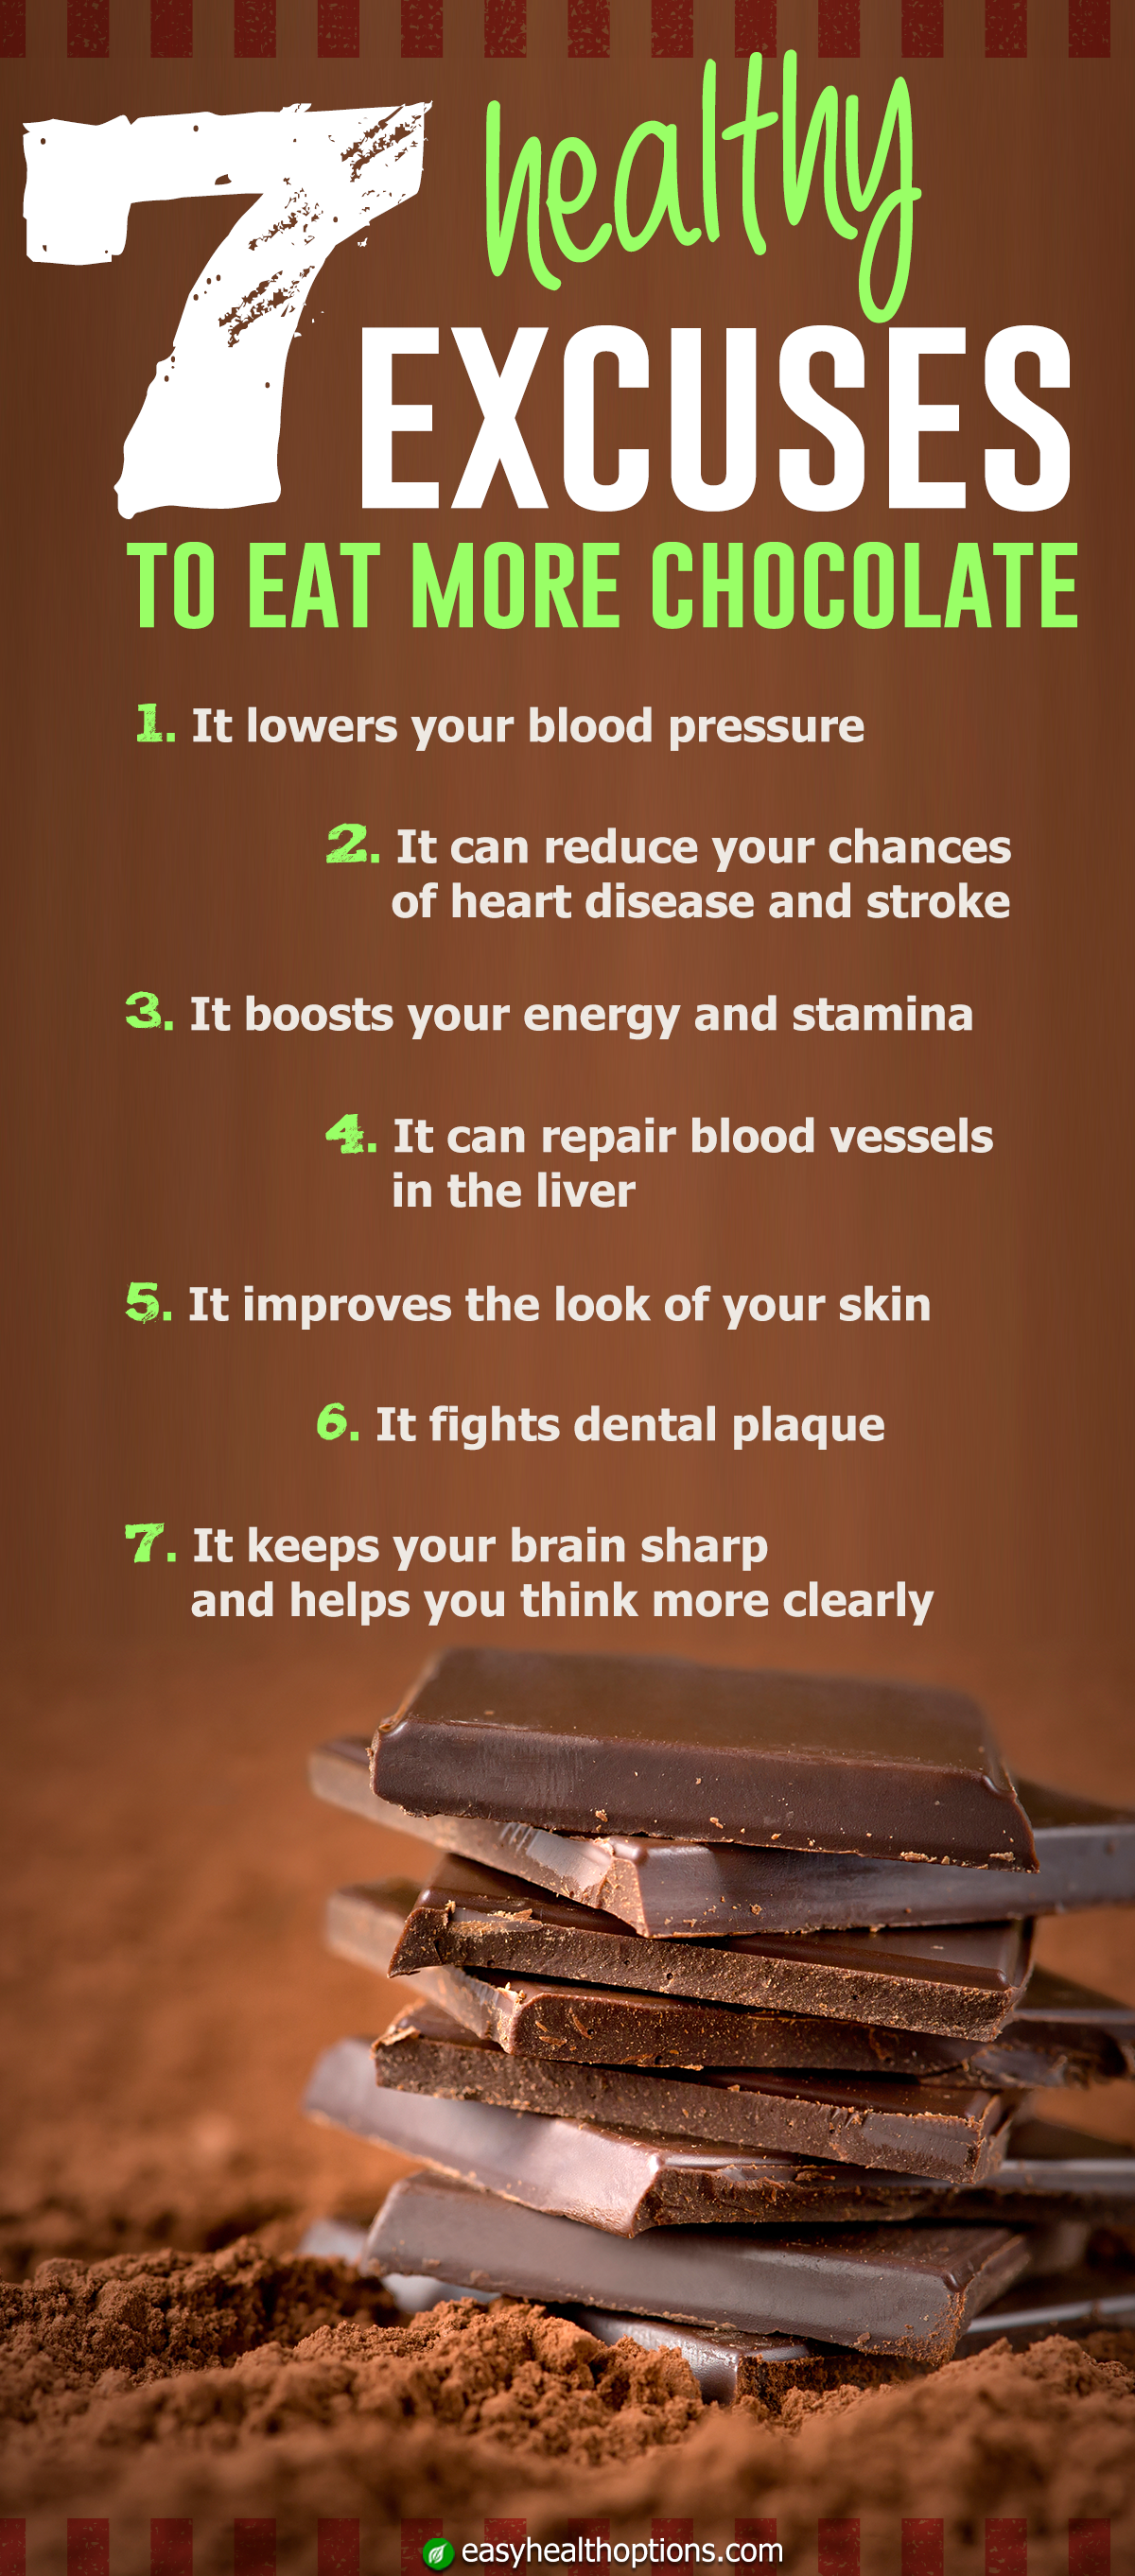 7 healthy excuses to eat more chocolate [infographic]